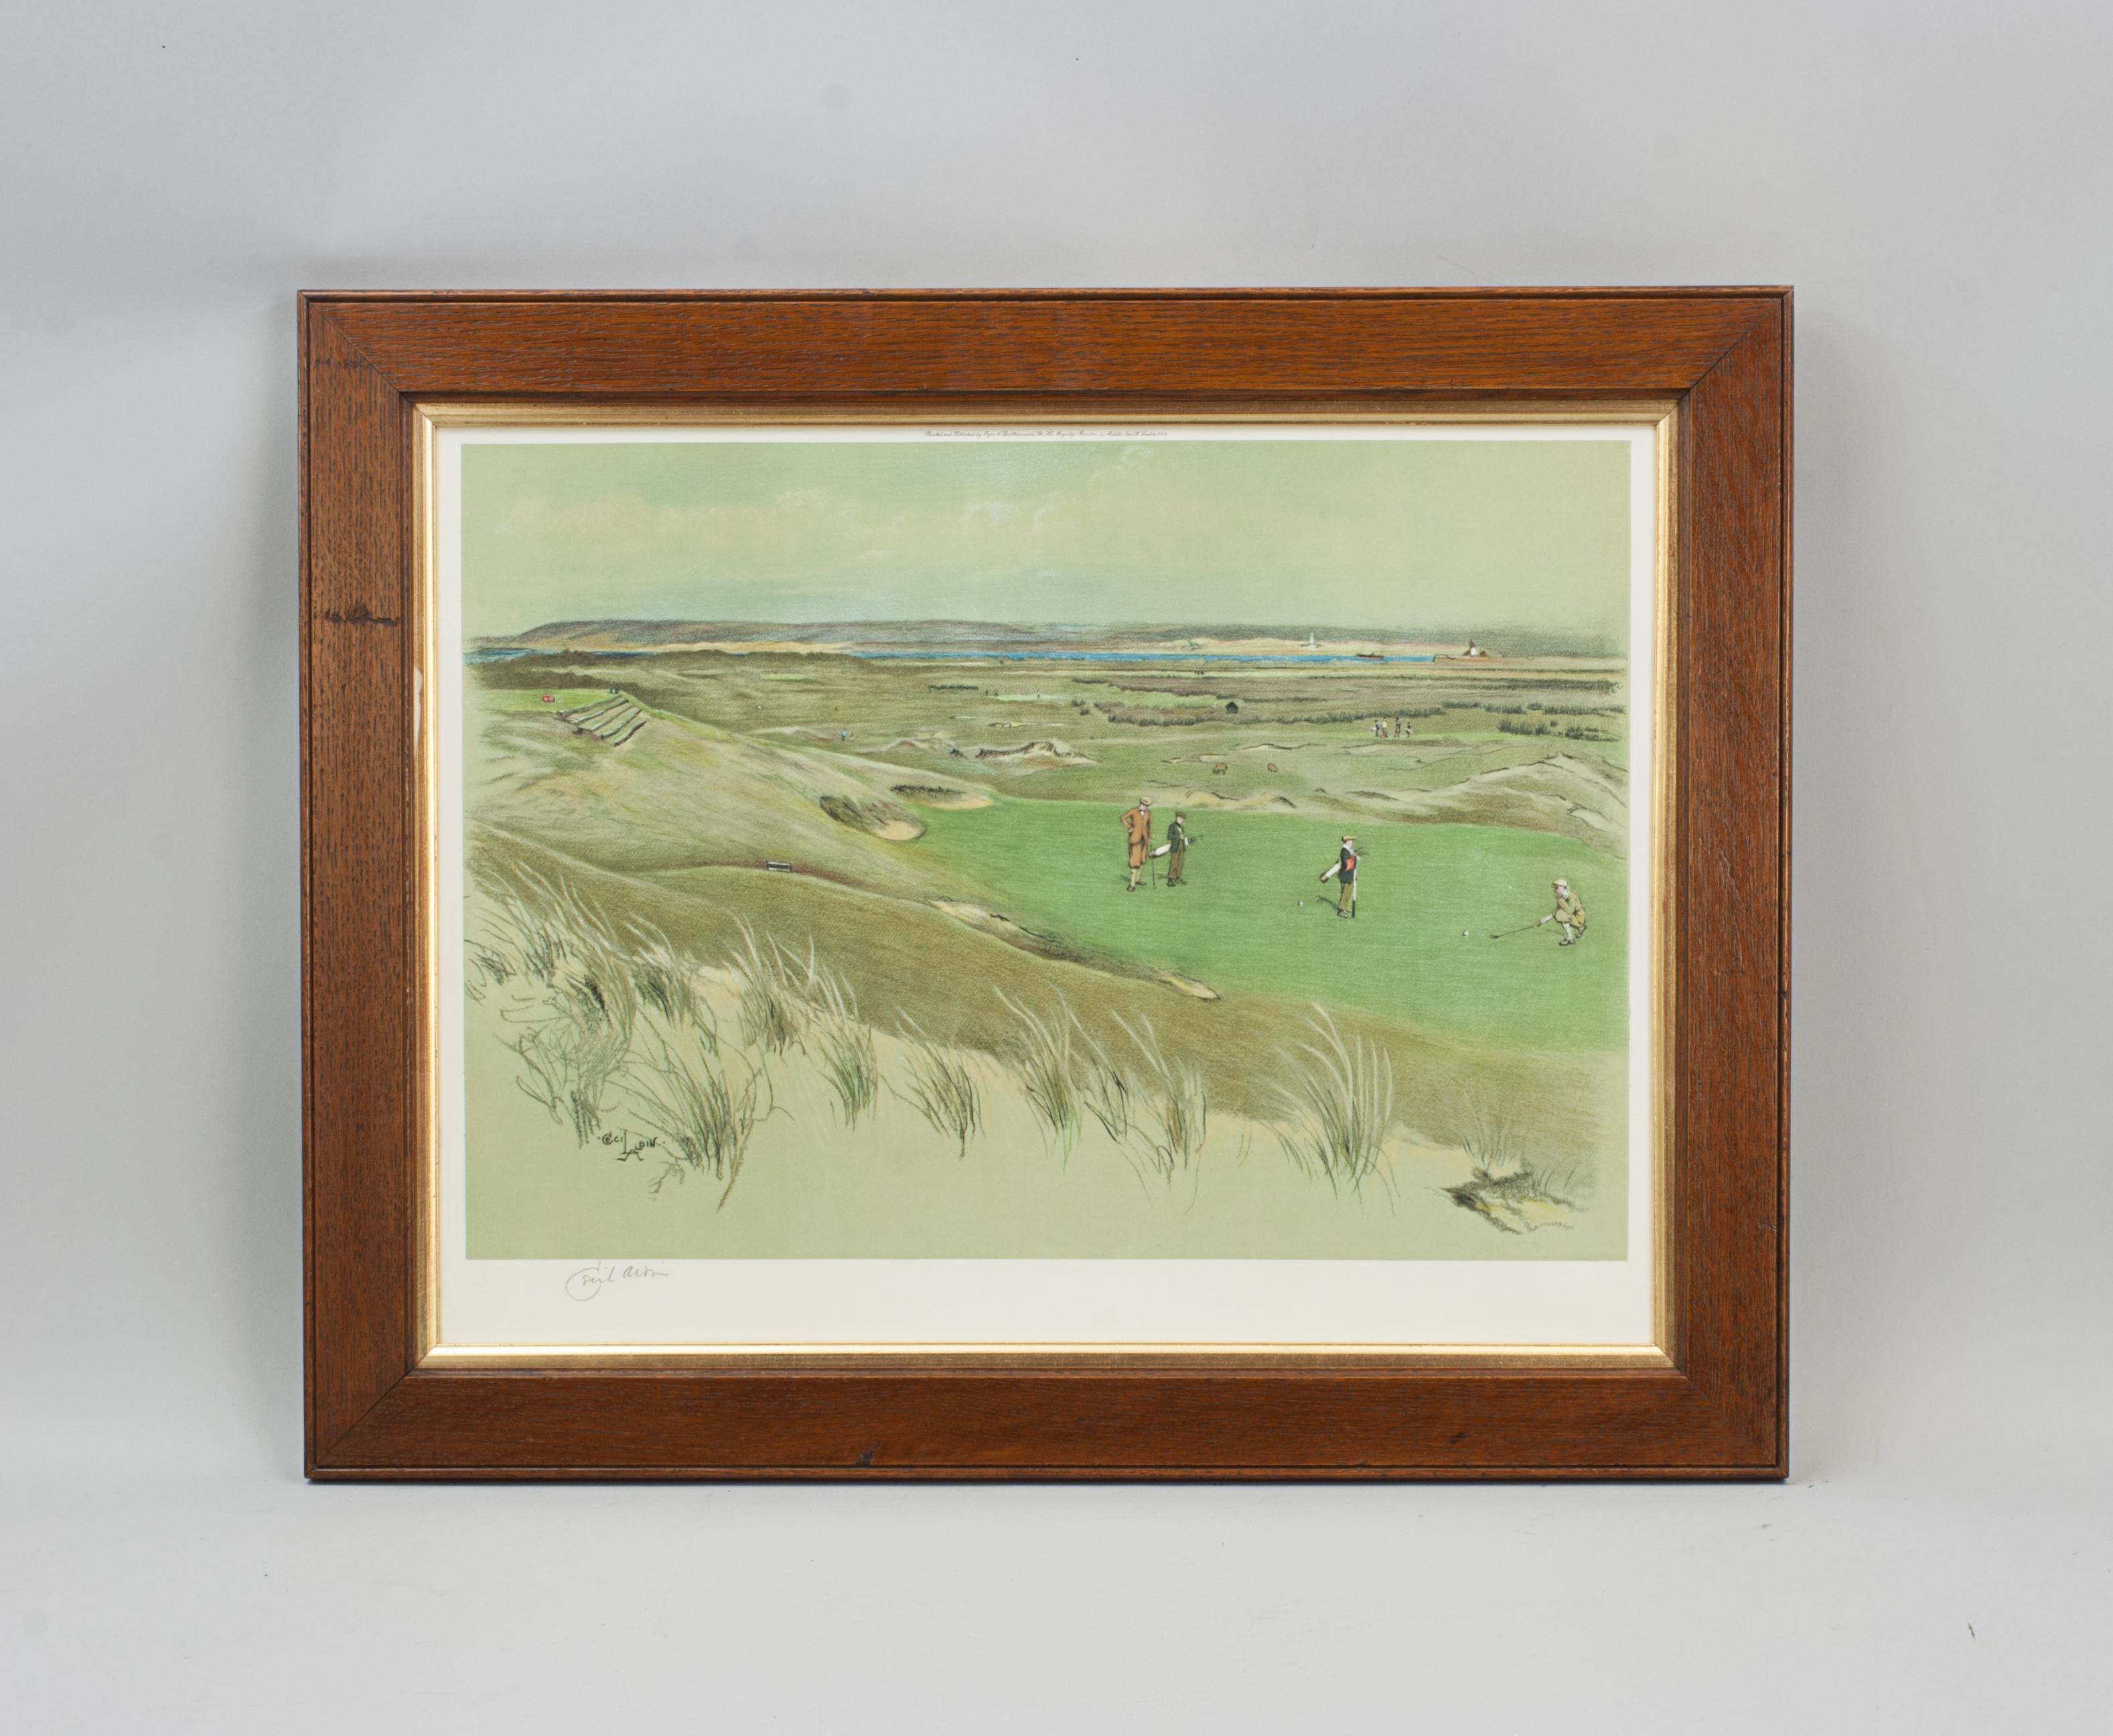 Cecil Aldin Golf Print, Westward Ho!- THE 6th GREEN.
A colourful framed golf photolithograph of Westward Ho! (Royal North Devon Golf Club) 6th Green. Signed in pencil in the lower left hand margin by the artist, Cecil Aldin. Printed and published by